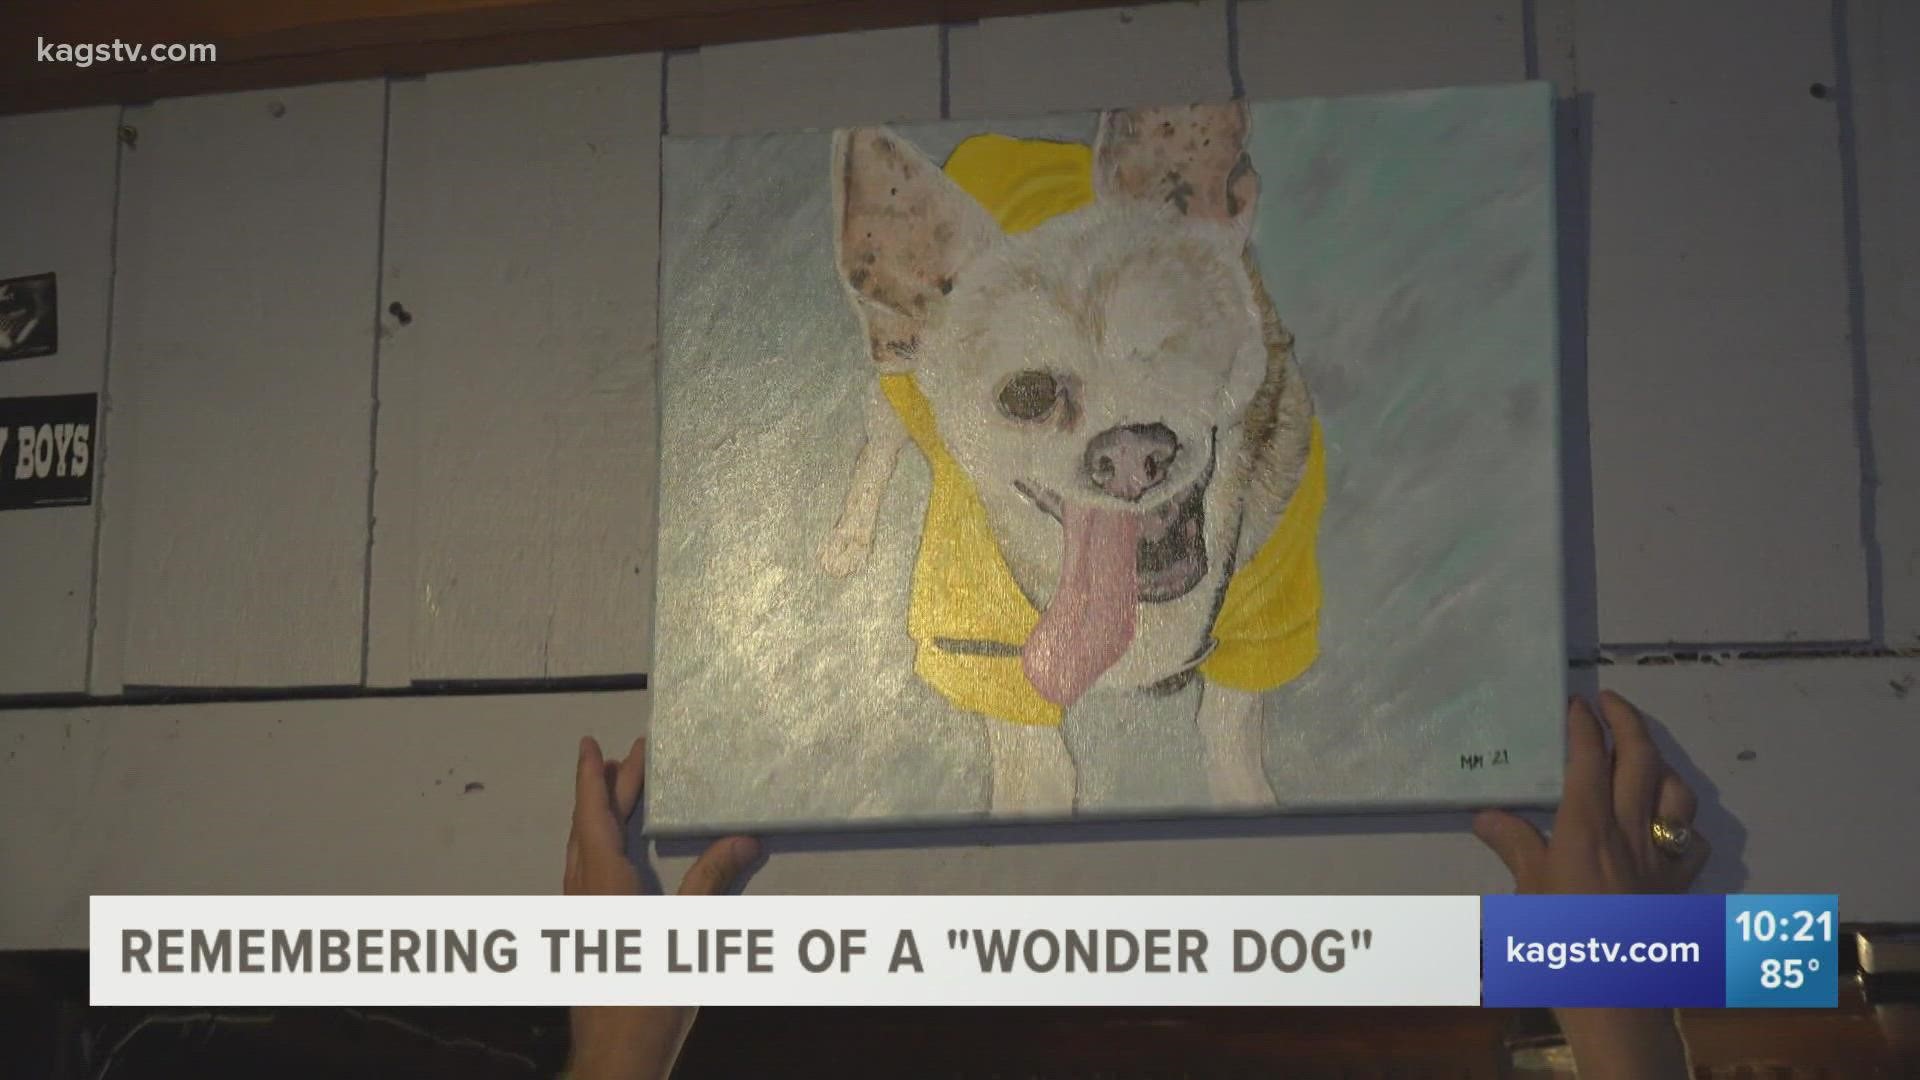 The one-eye furry friend frequented ShipWreck grill, where a painting now hangs in his honor